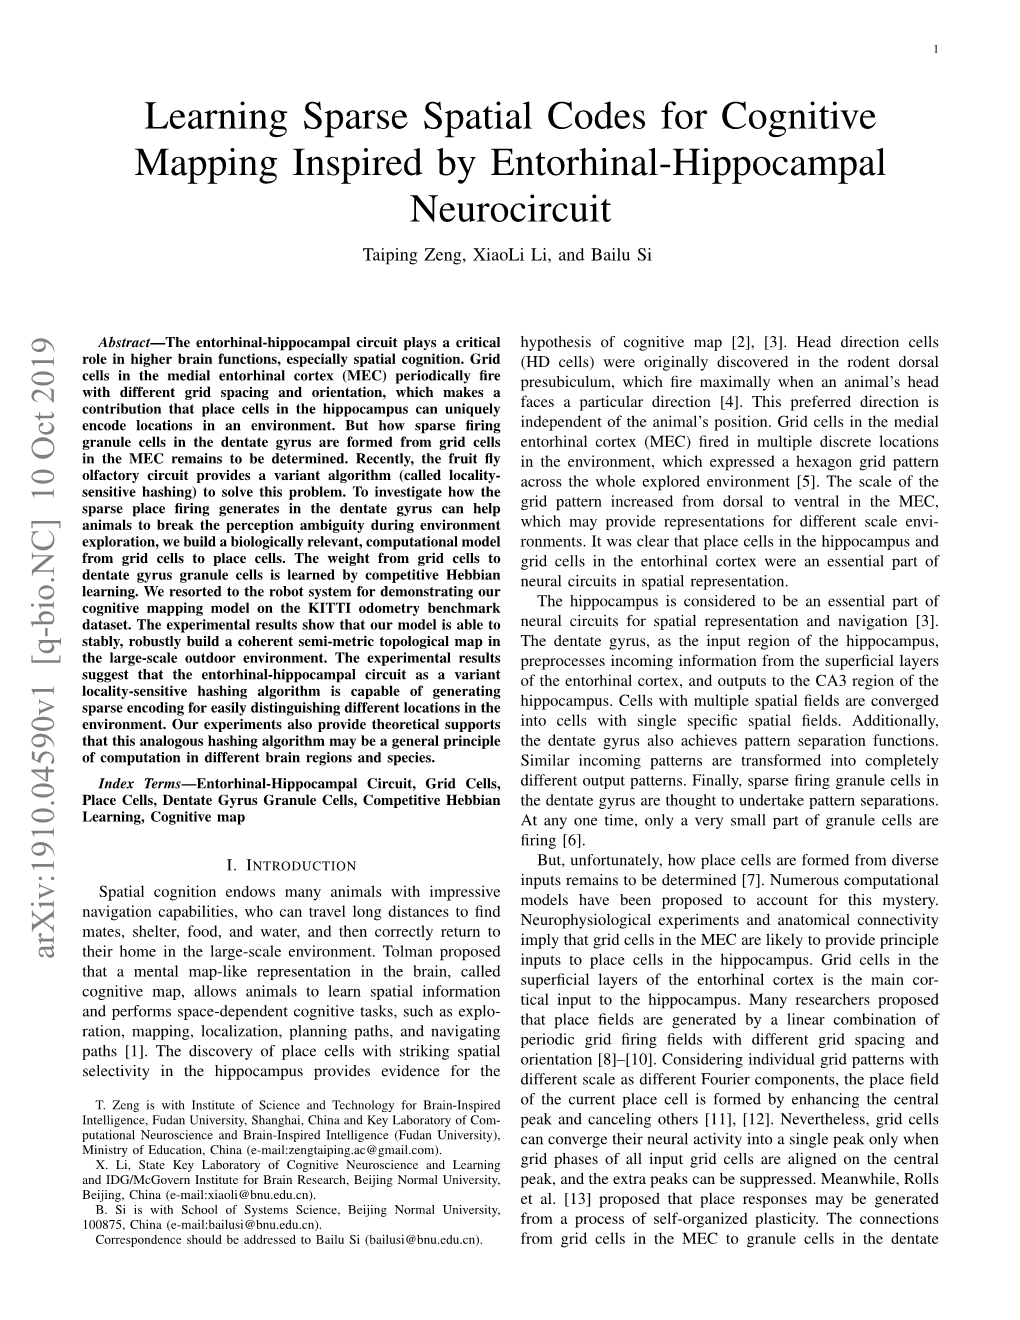 Learning Sparse Spatial Codes for Cognitive Mapping Inspired by Entorhinal-Hippocampal Neurocircuit Taiping Zeng, Xiaoli Li, and Bailu Si